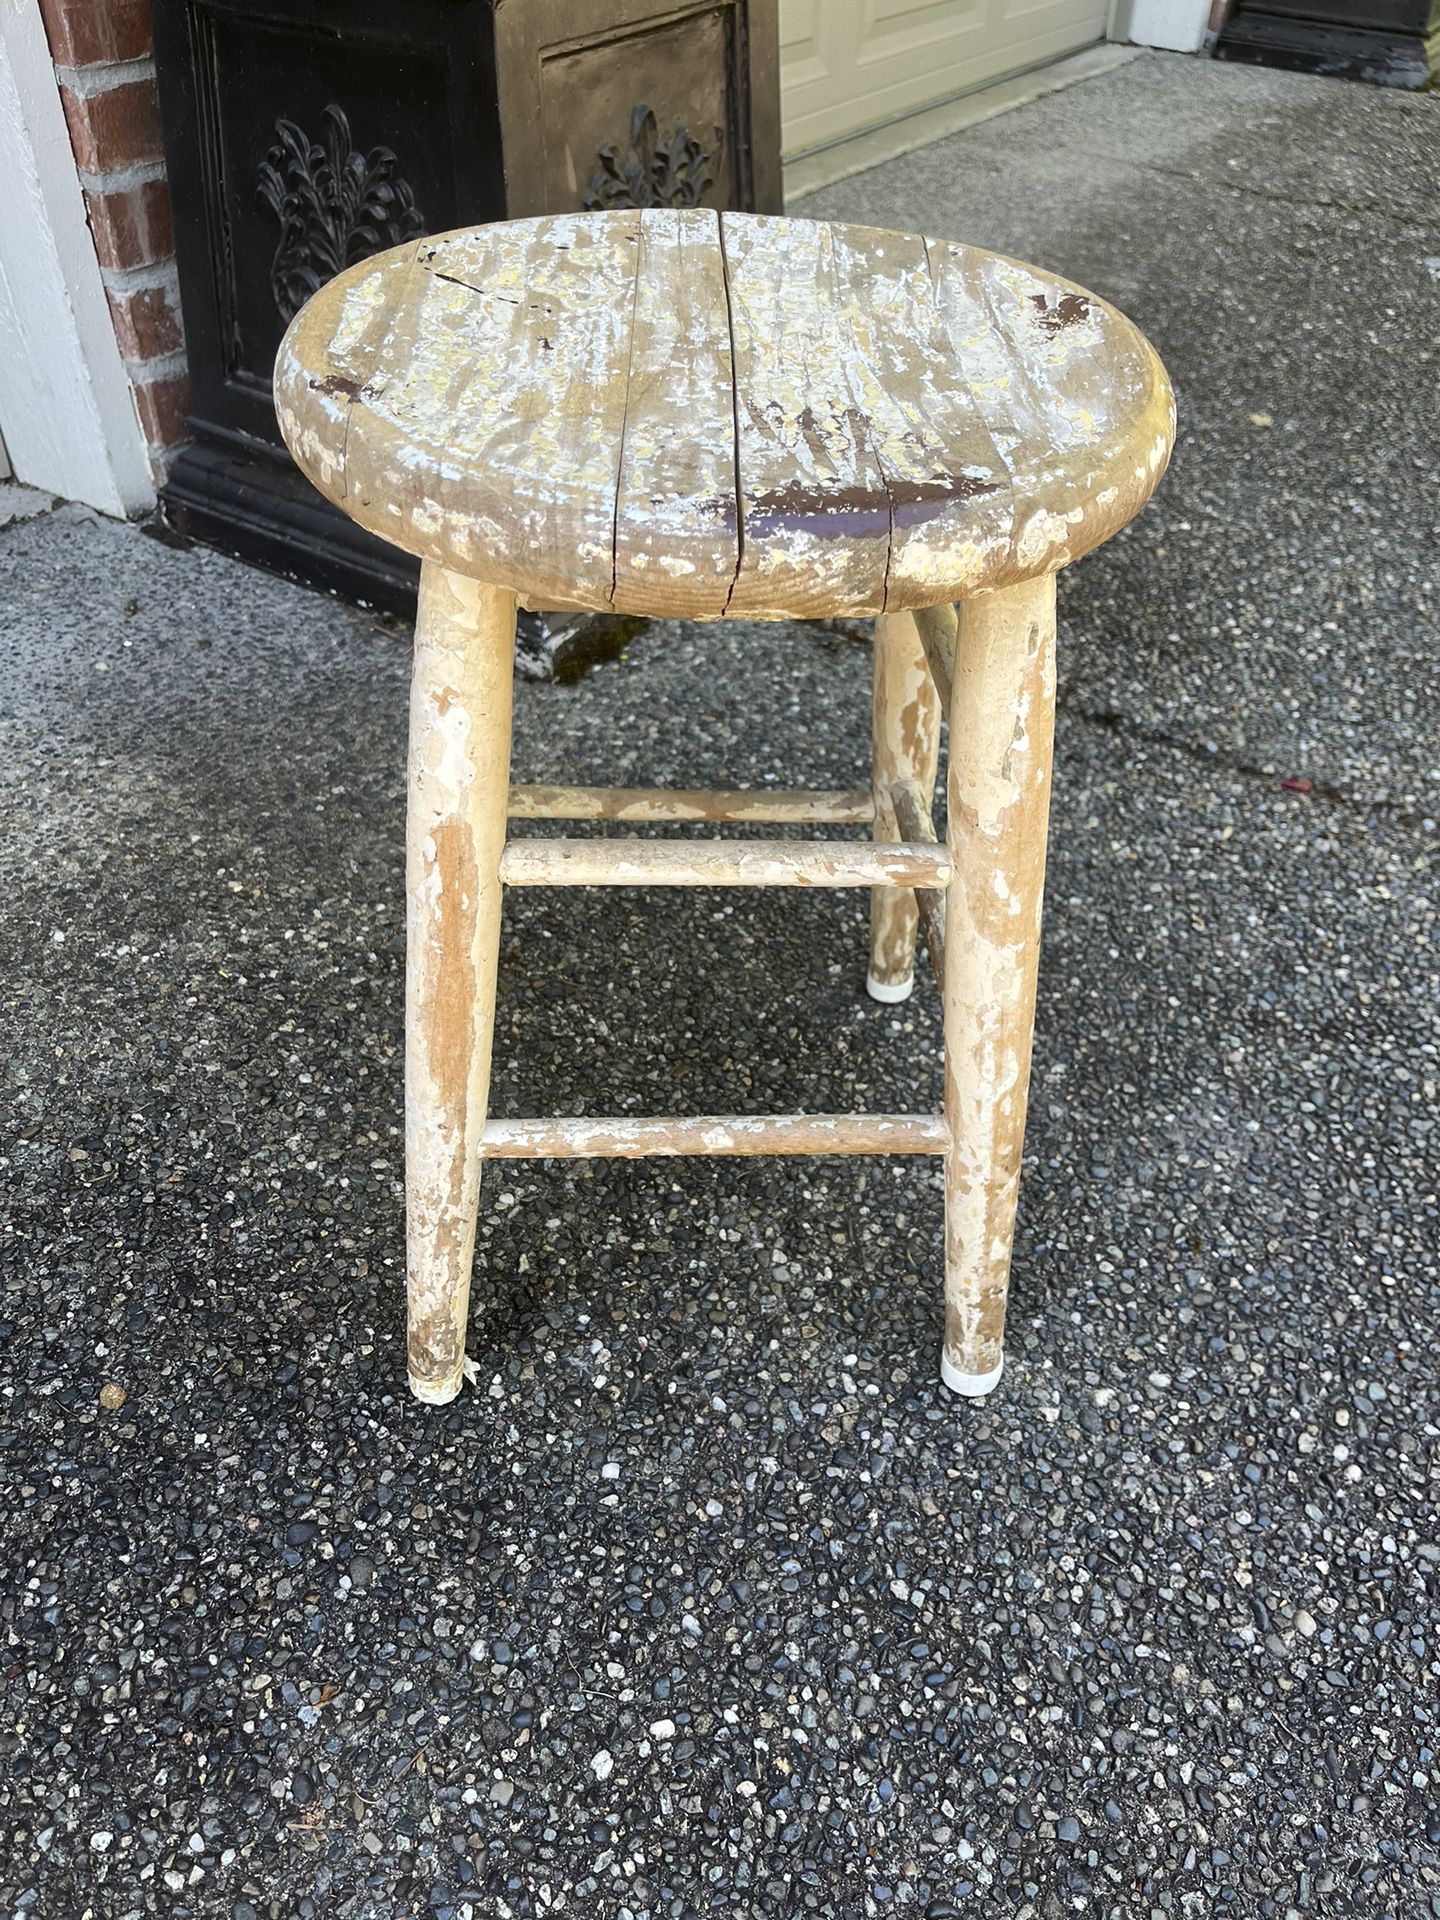 Shabby Chic Stool Or Plant Stand 